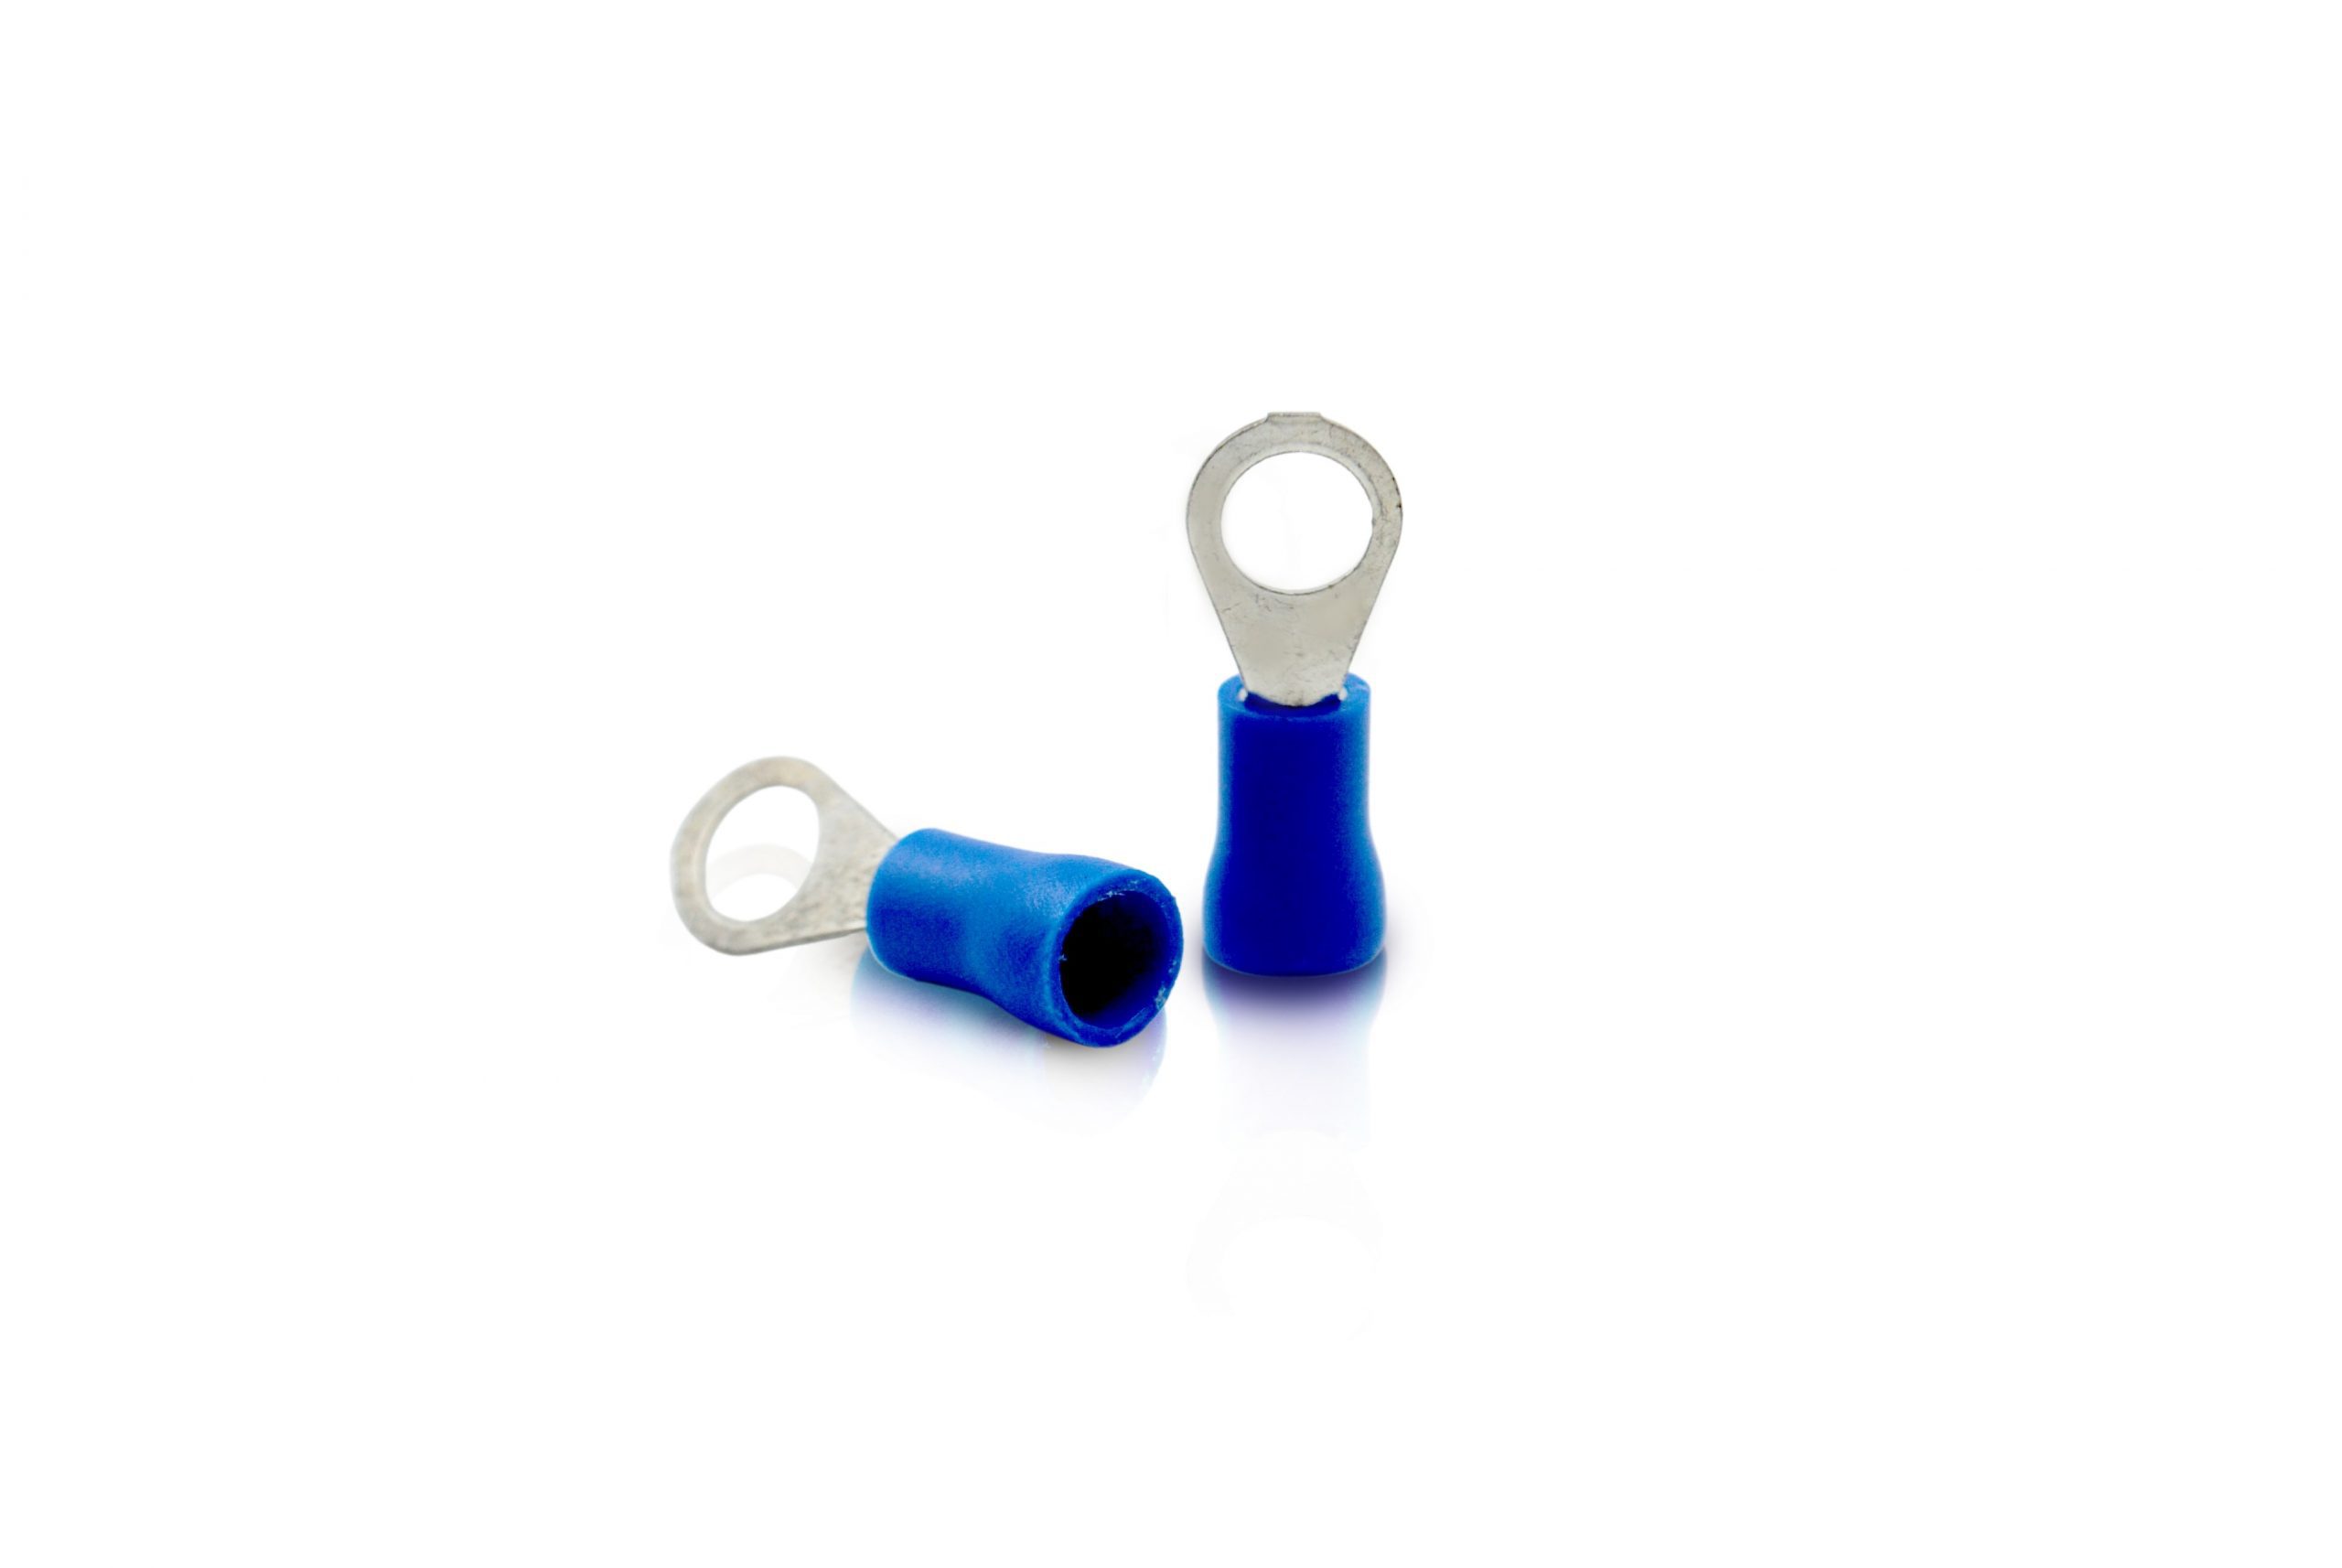 Ring Insulated Electrical Wire Crimp Terminals 2.5 mm